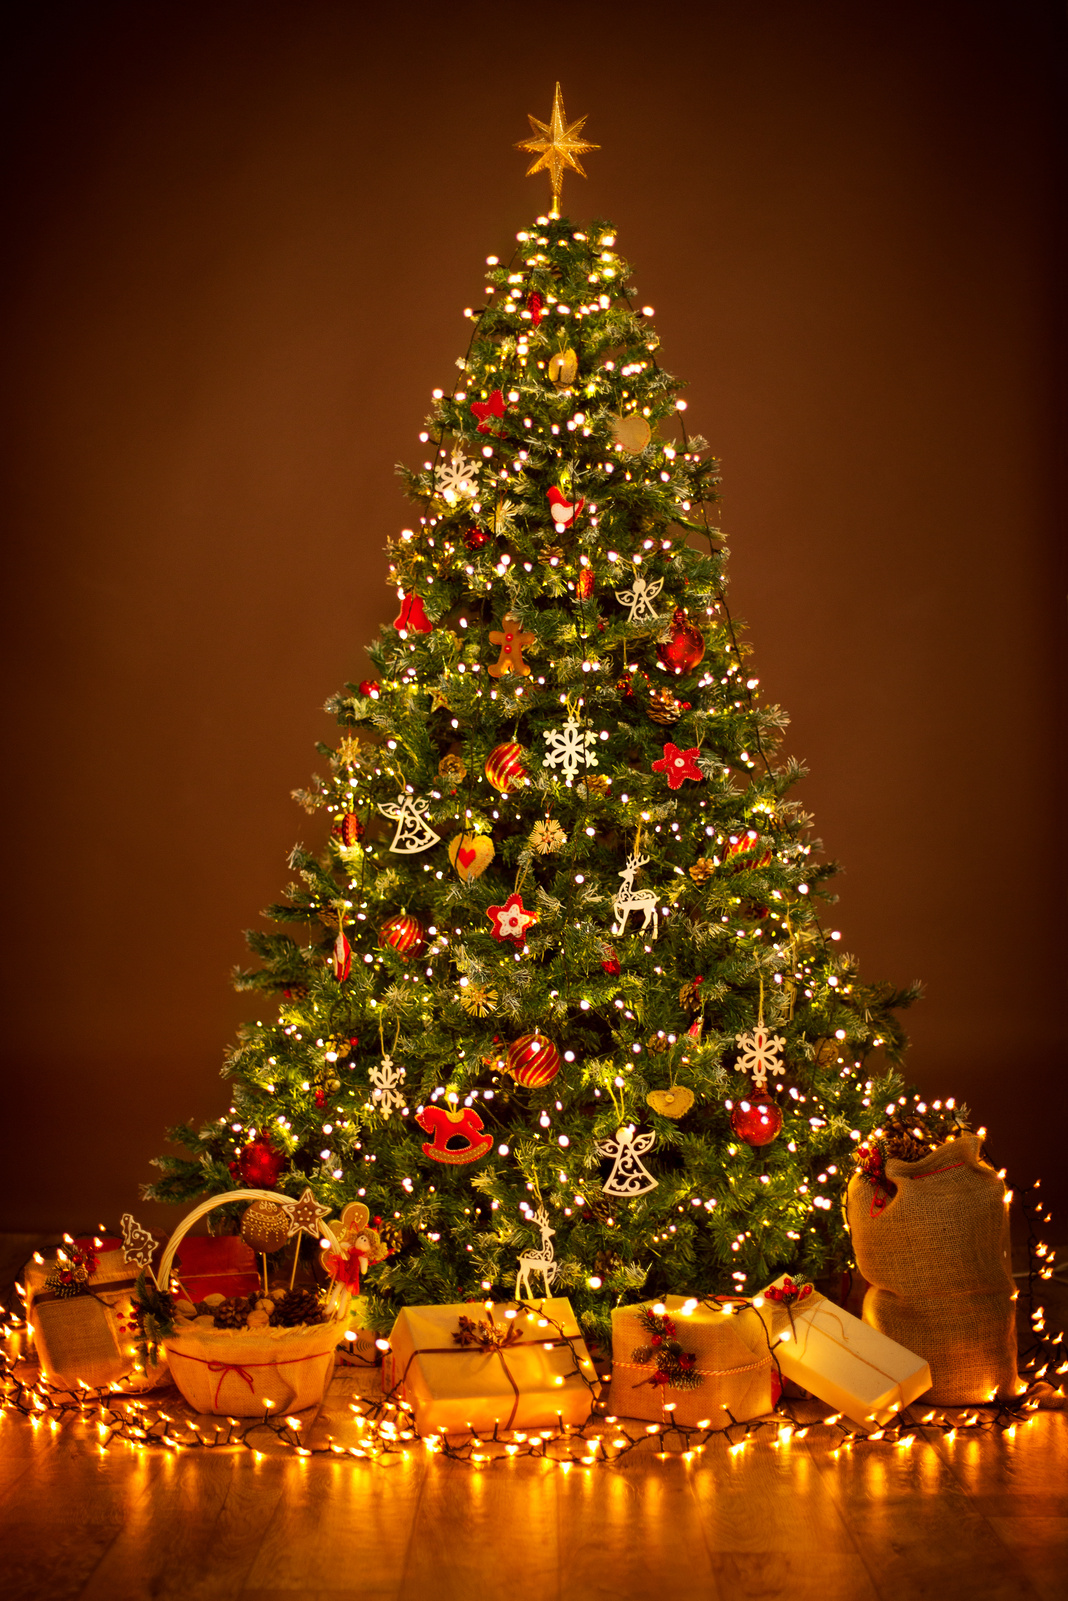 Christmas Tree lighting in night, Xmas Decorations, Present Gifts